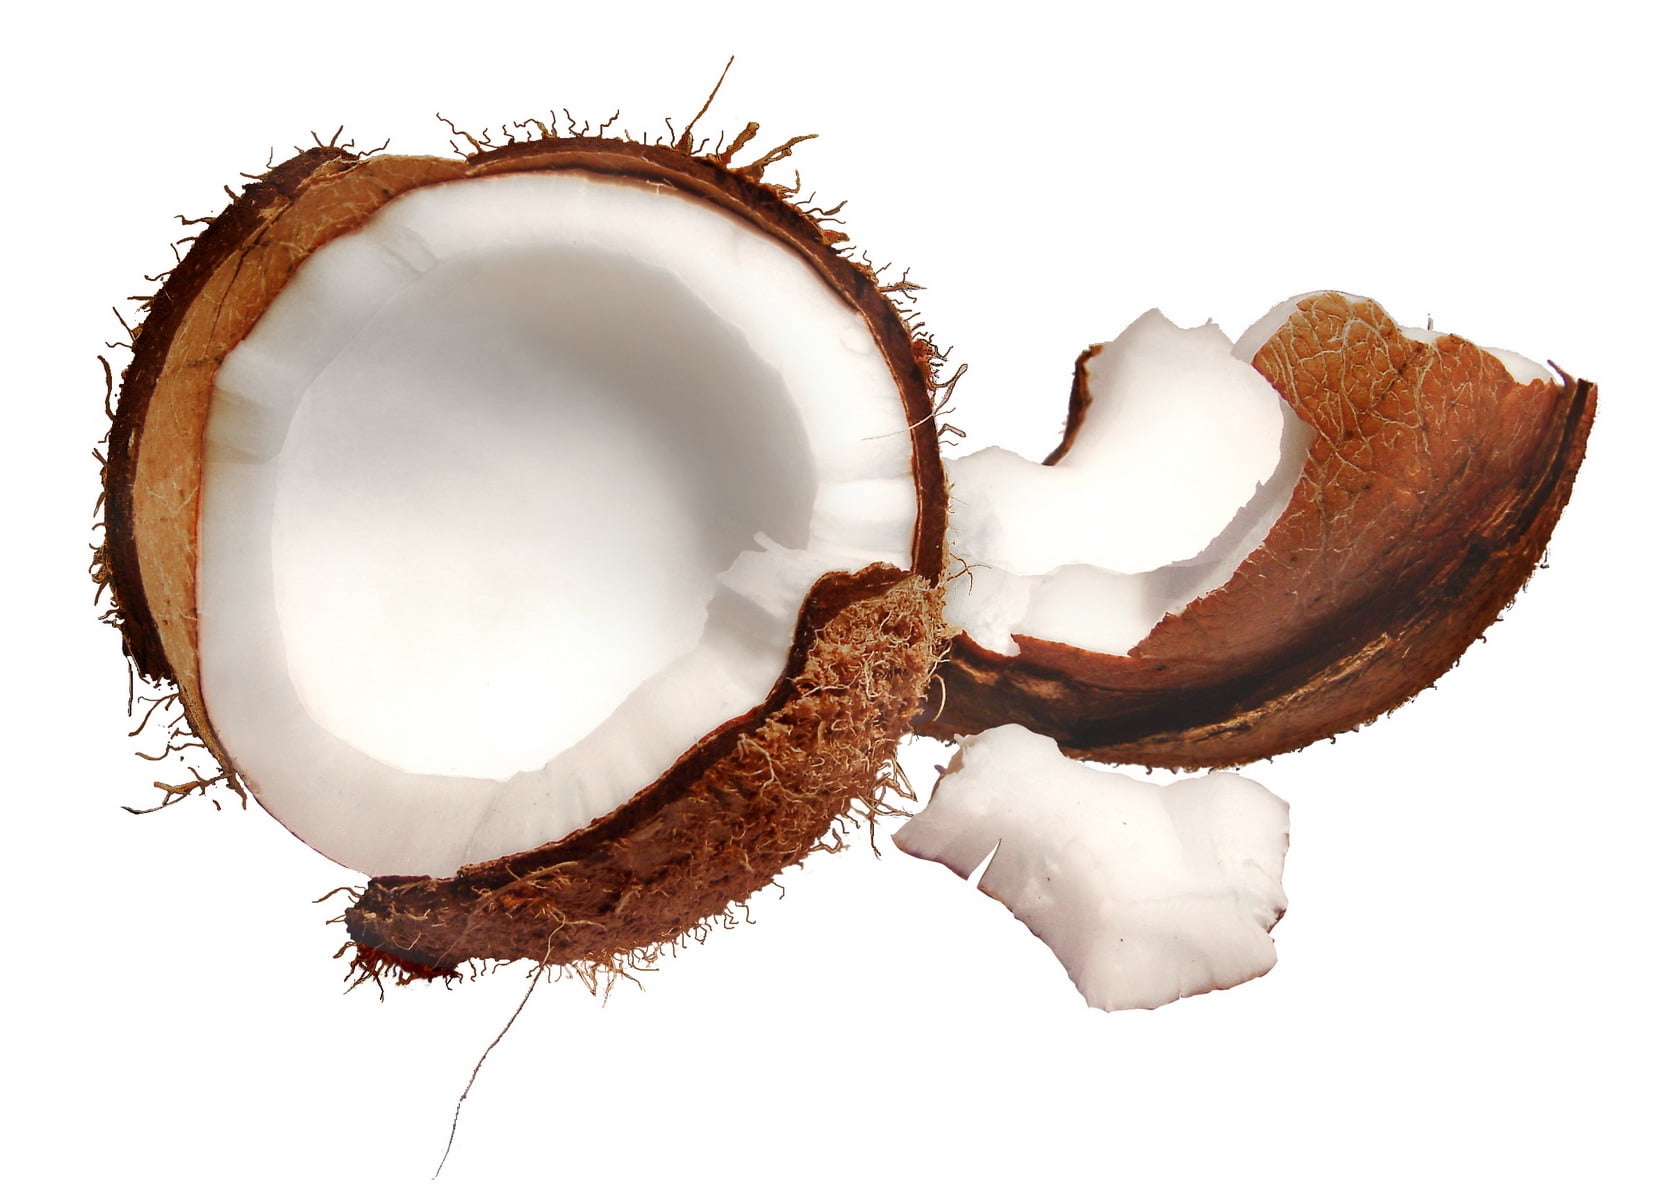 coconut clip art, shell, pulp, nature, white, isolated, close-up